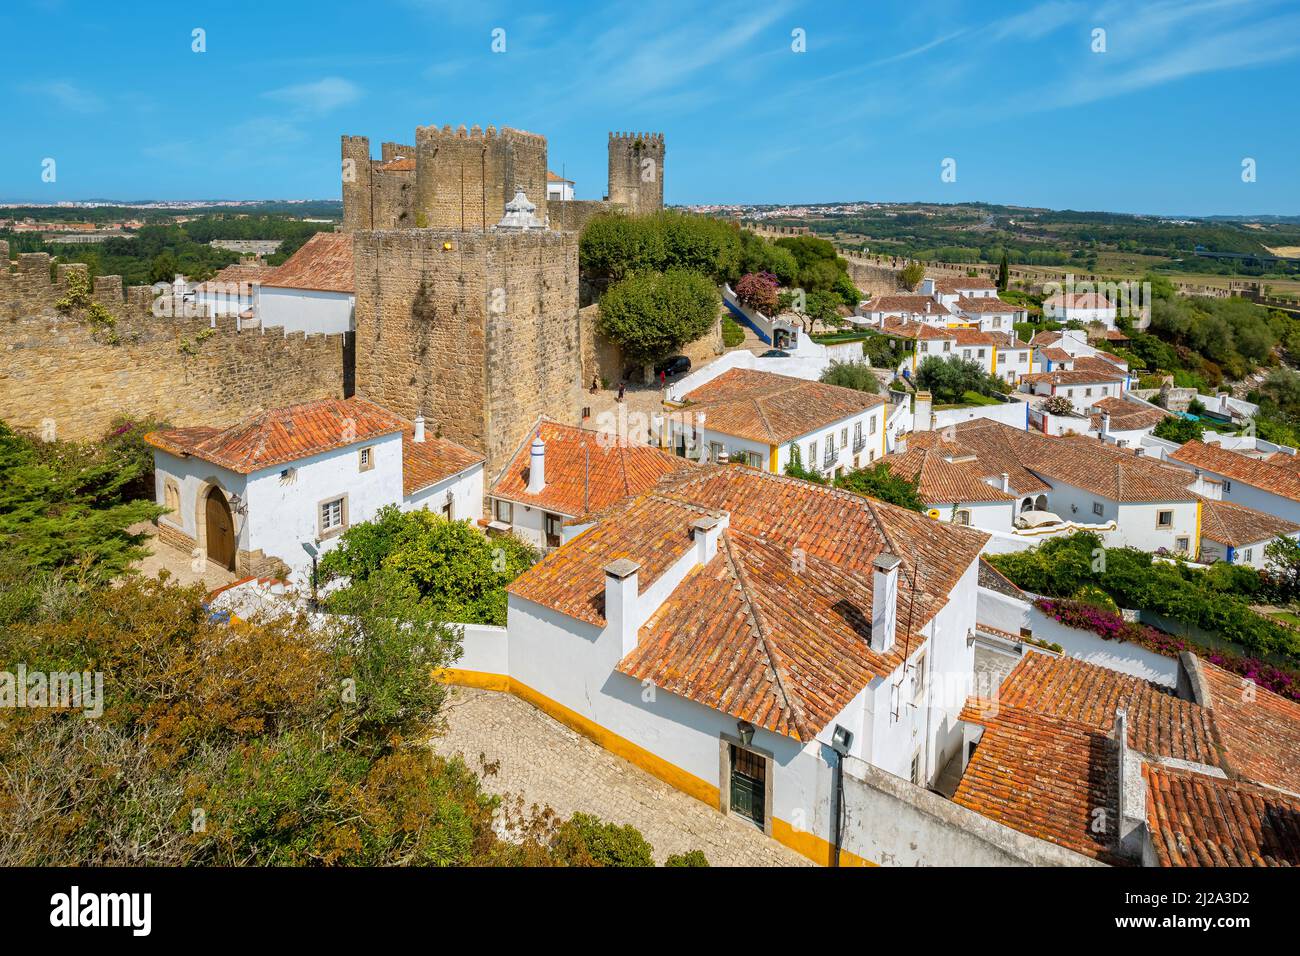 Rooftops of town and medieval fortress. Obidos. Portugal Stock Photo